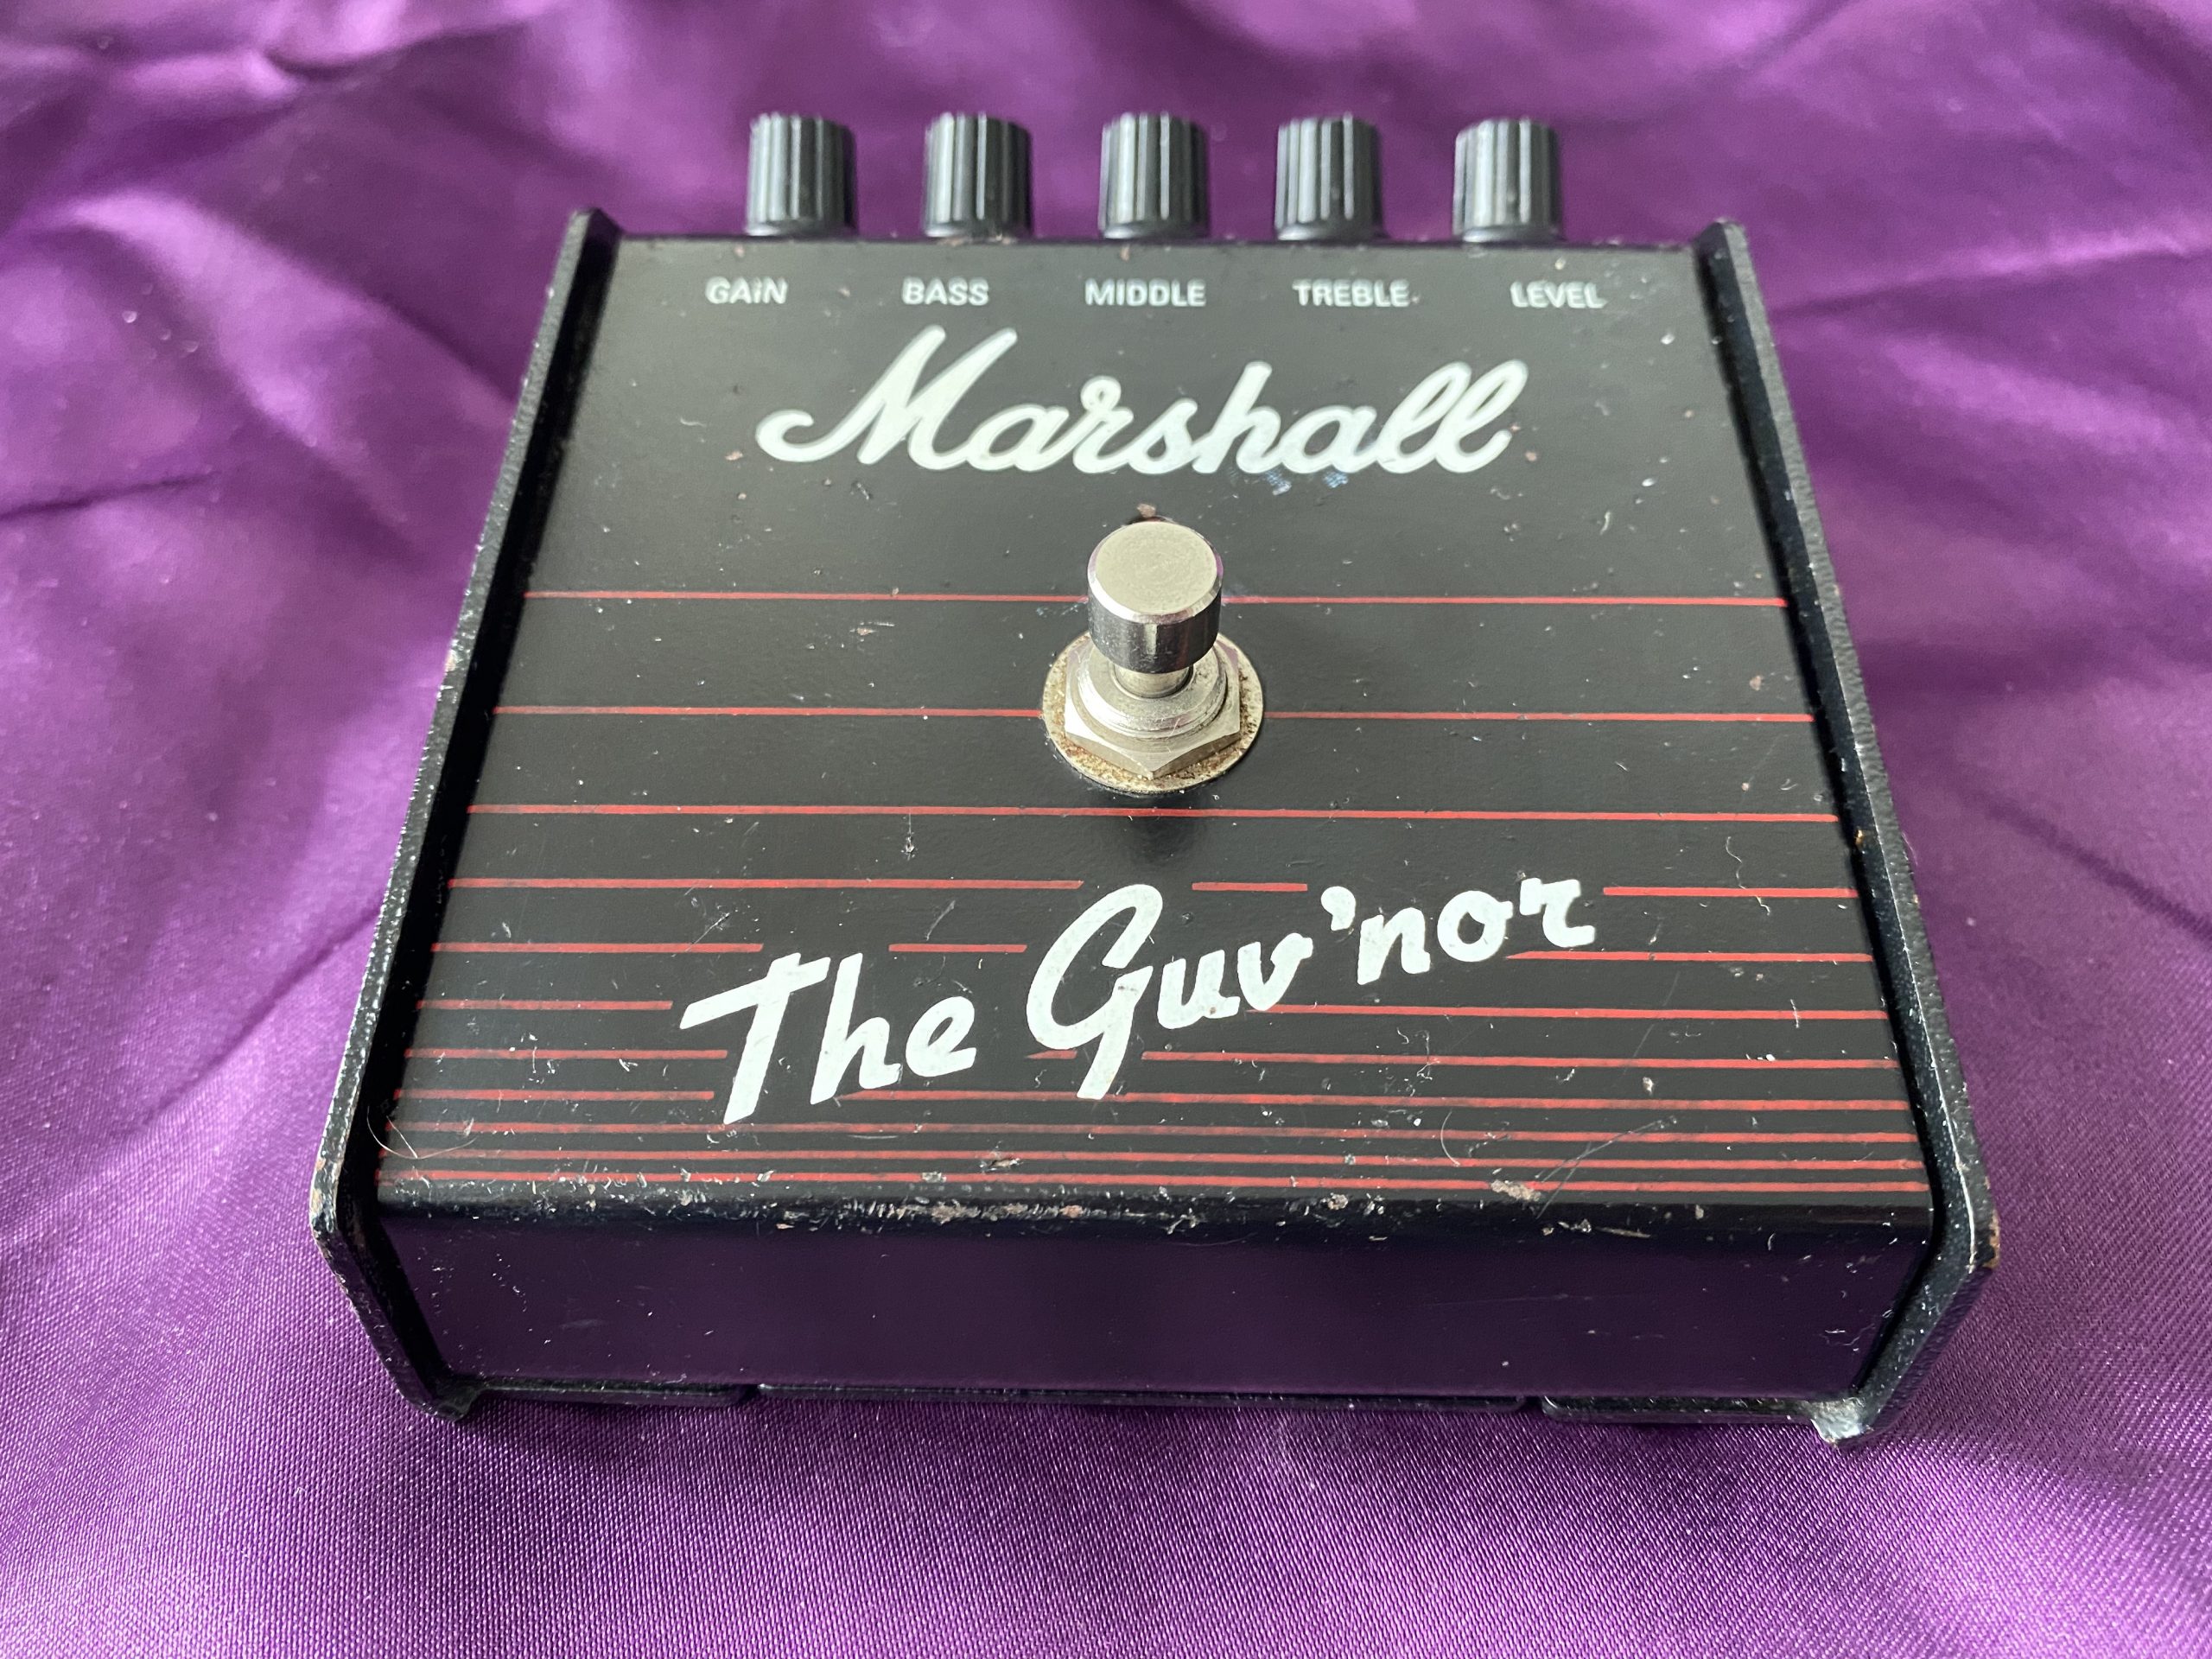 Feature – 1989 Marshall The Guv'nor